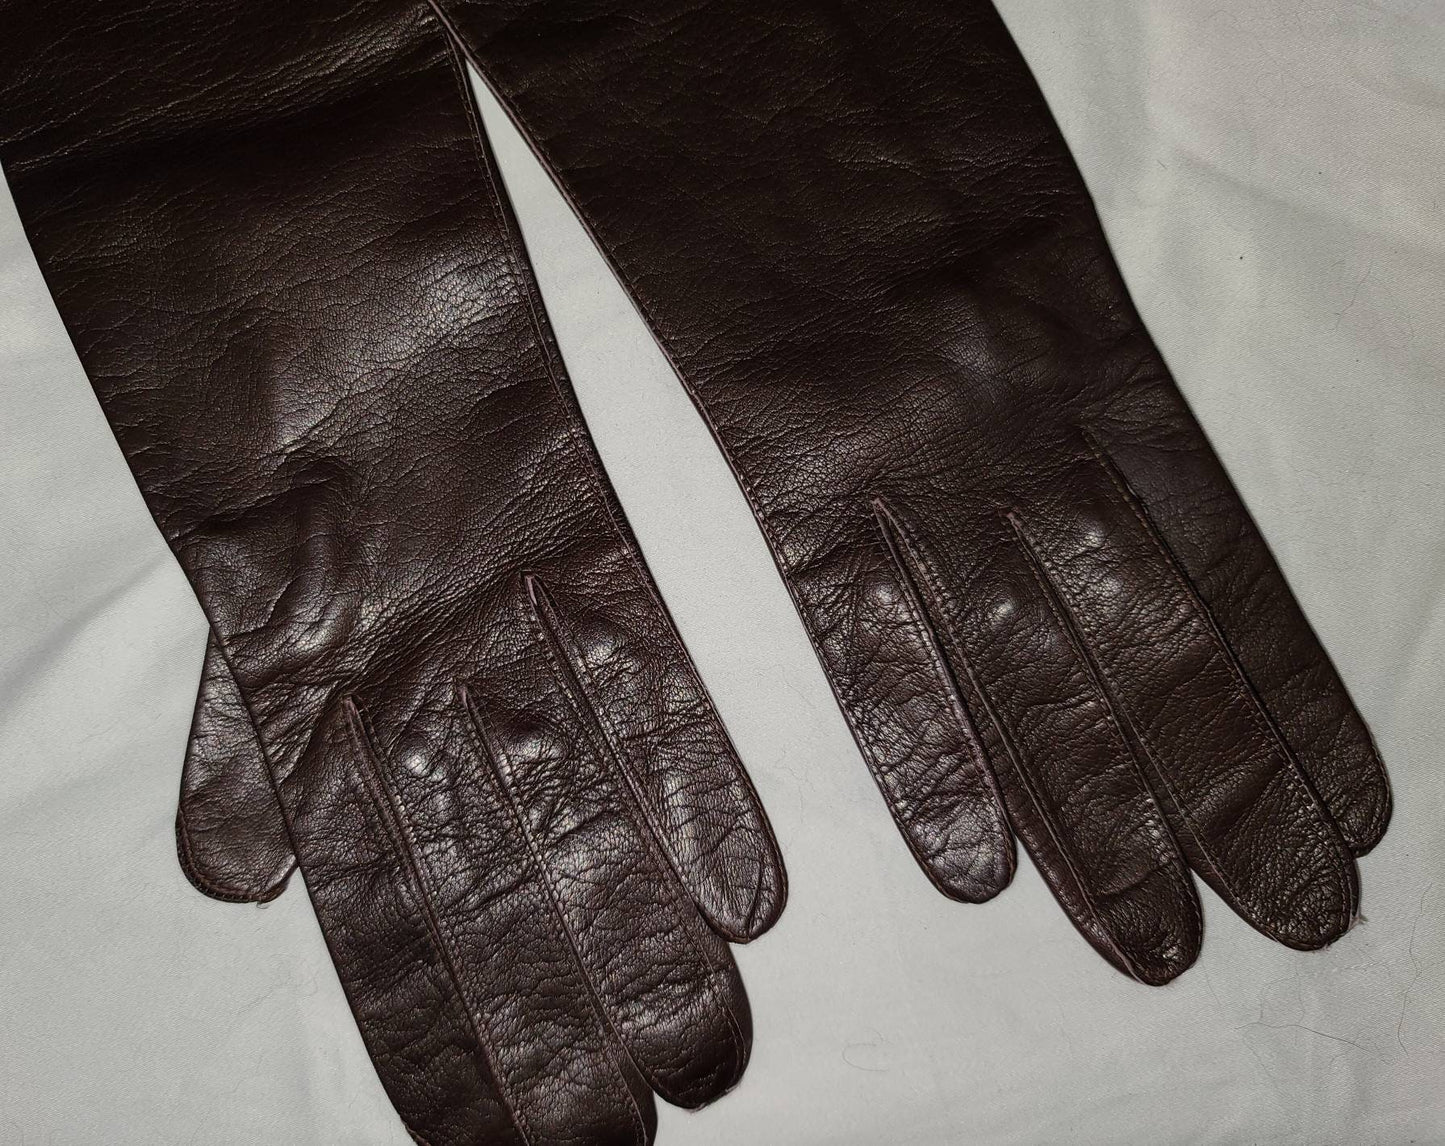 Vintage Leather Gloves 1950s Mid Length Thin Dark Maroon Brown Kid Gloves by Superb American Zone Western Germany Rockabilly Pinup 6 1/2